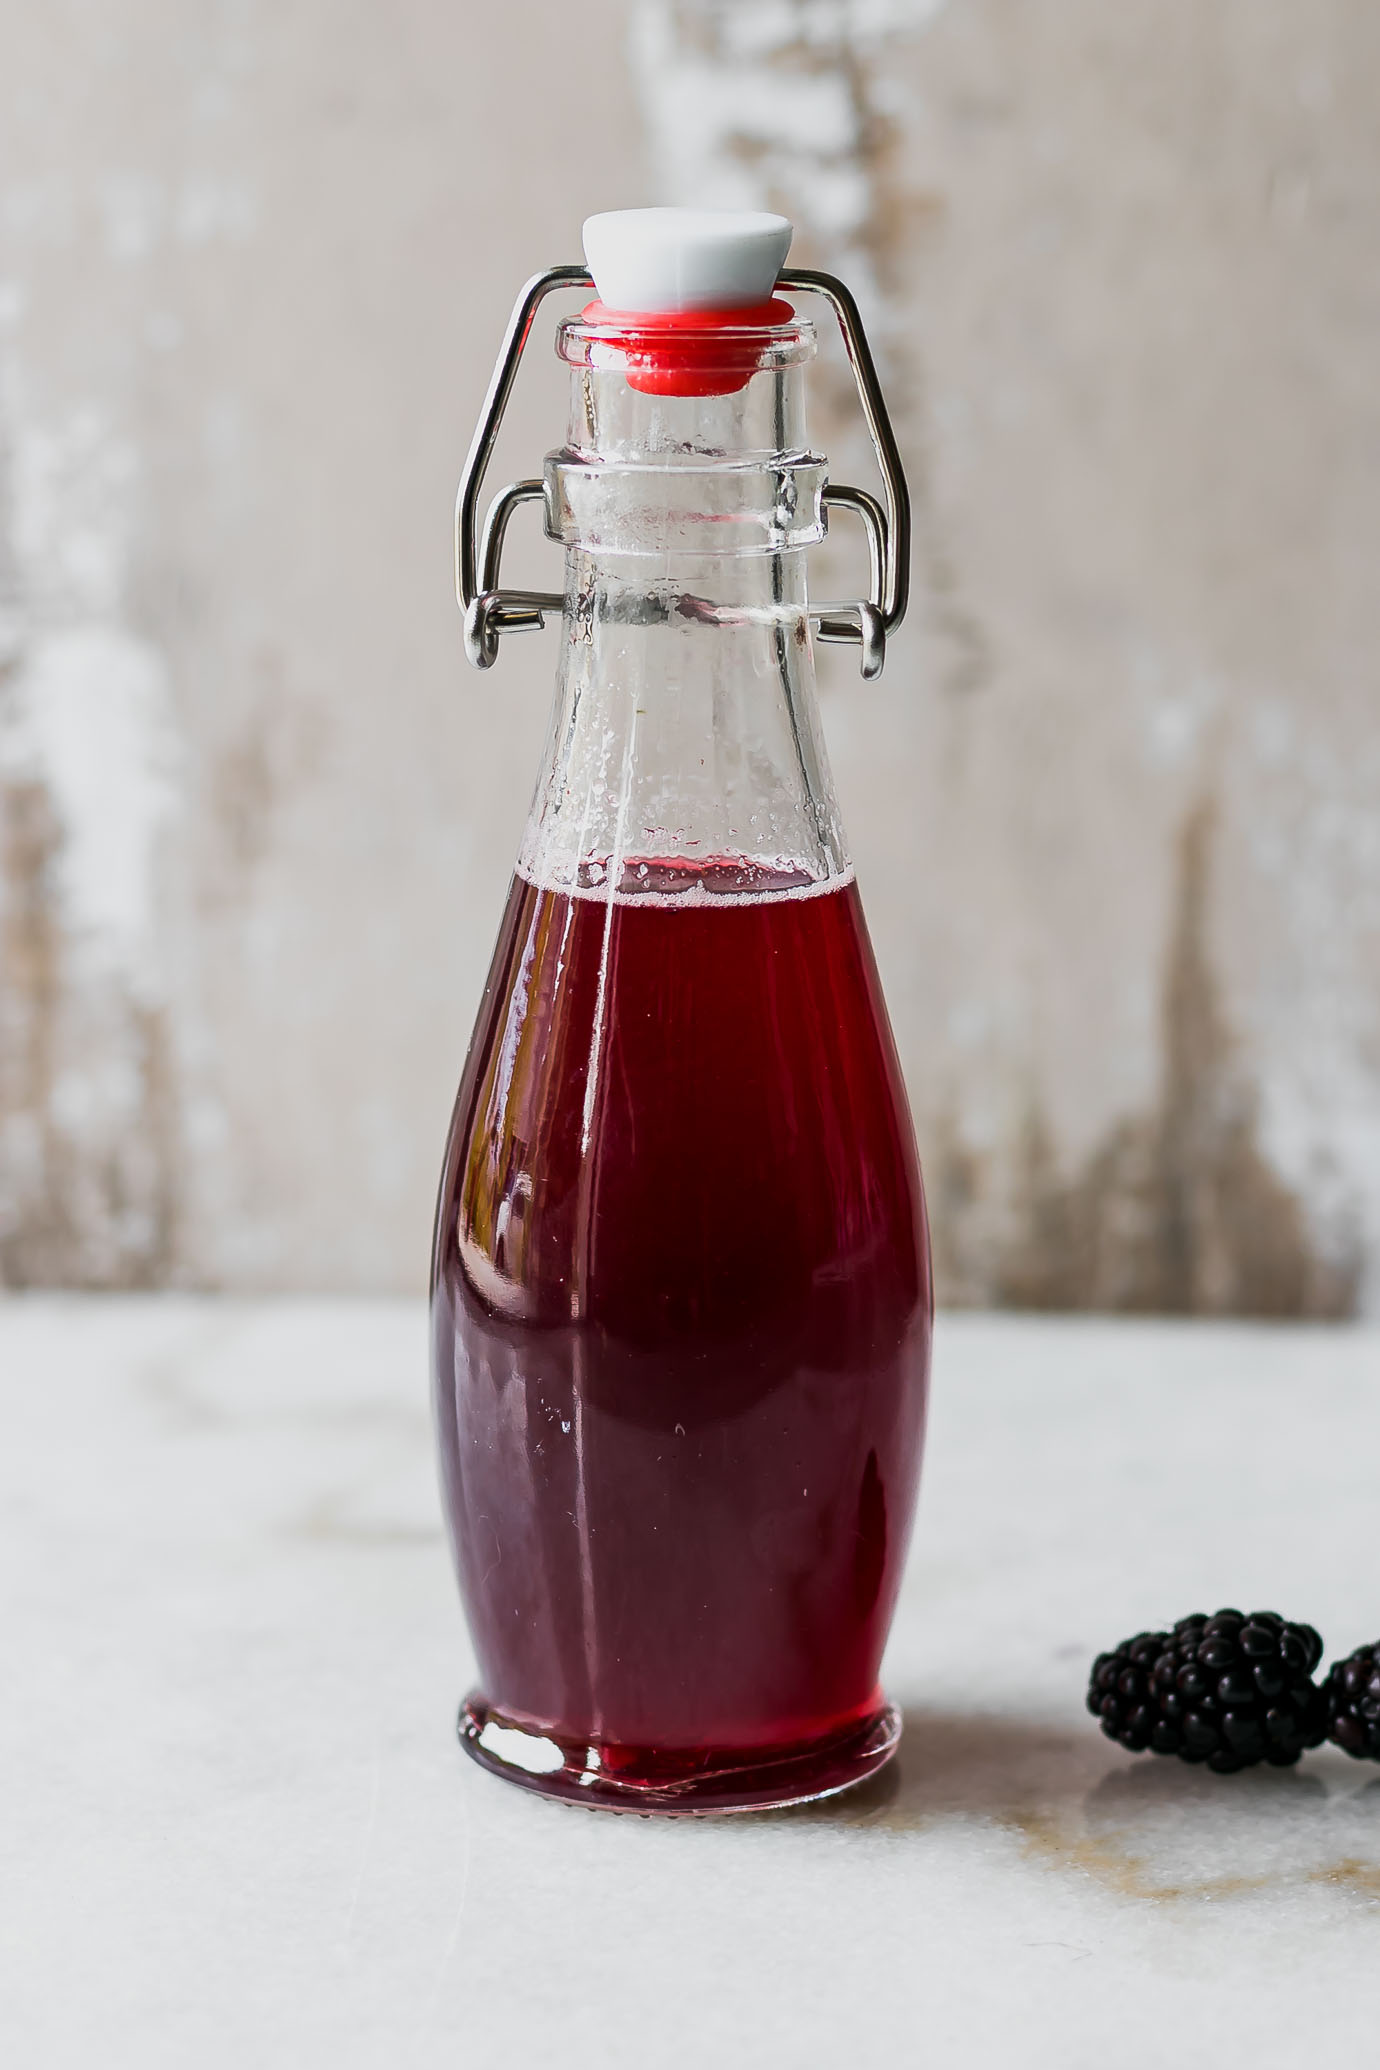 blackberry simple syrup in a jar on a white countertop